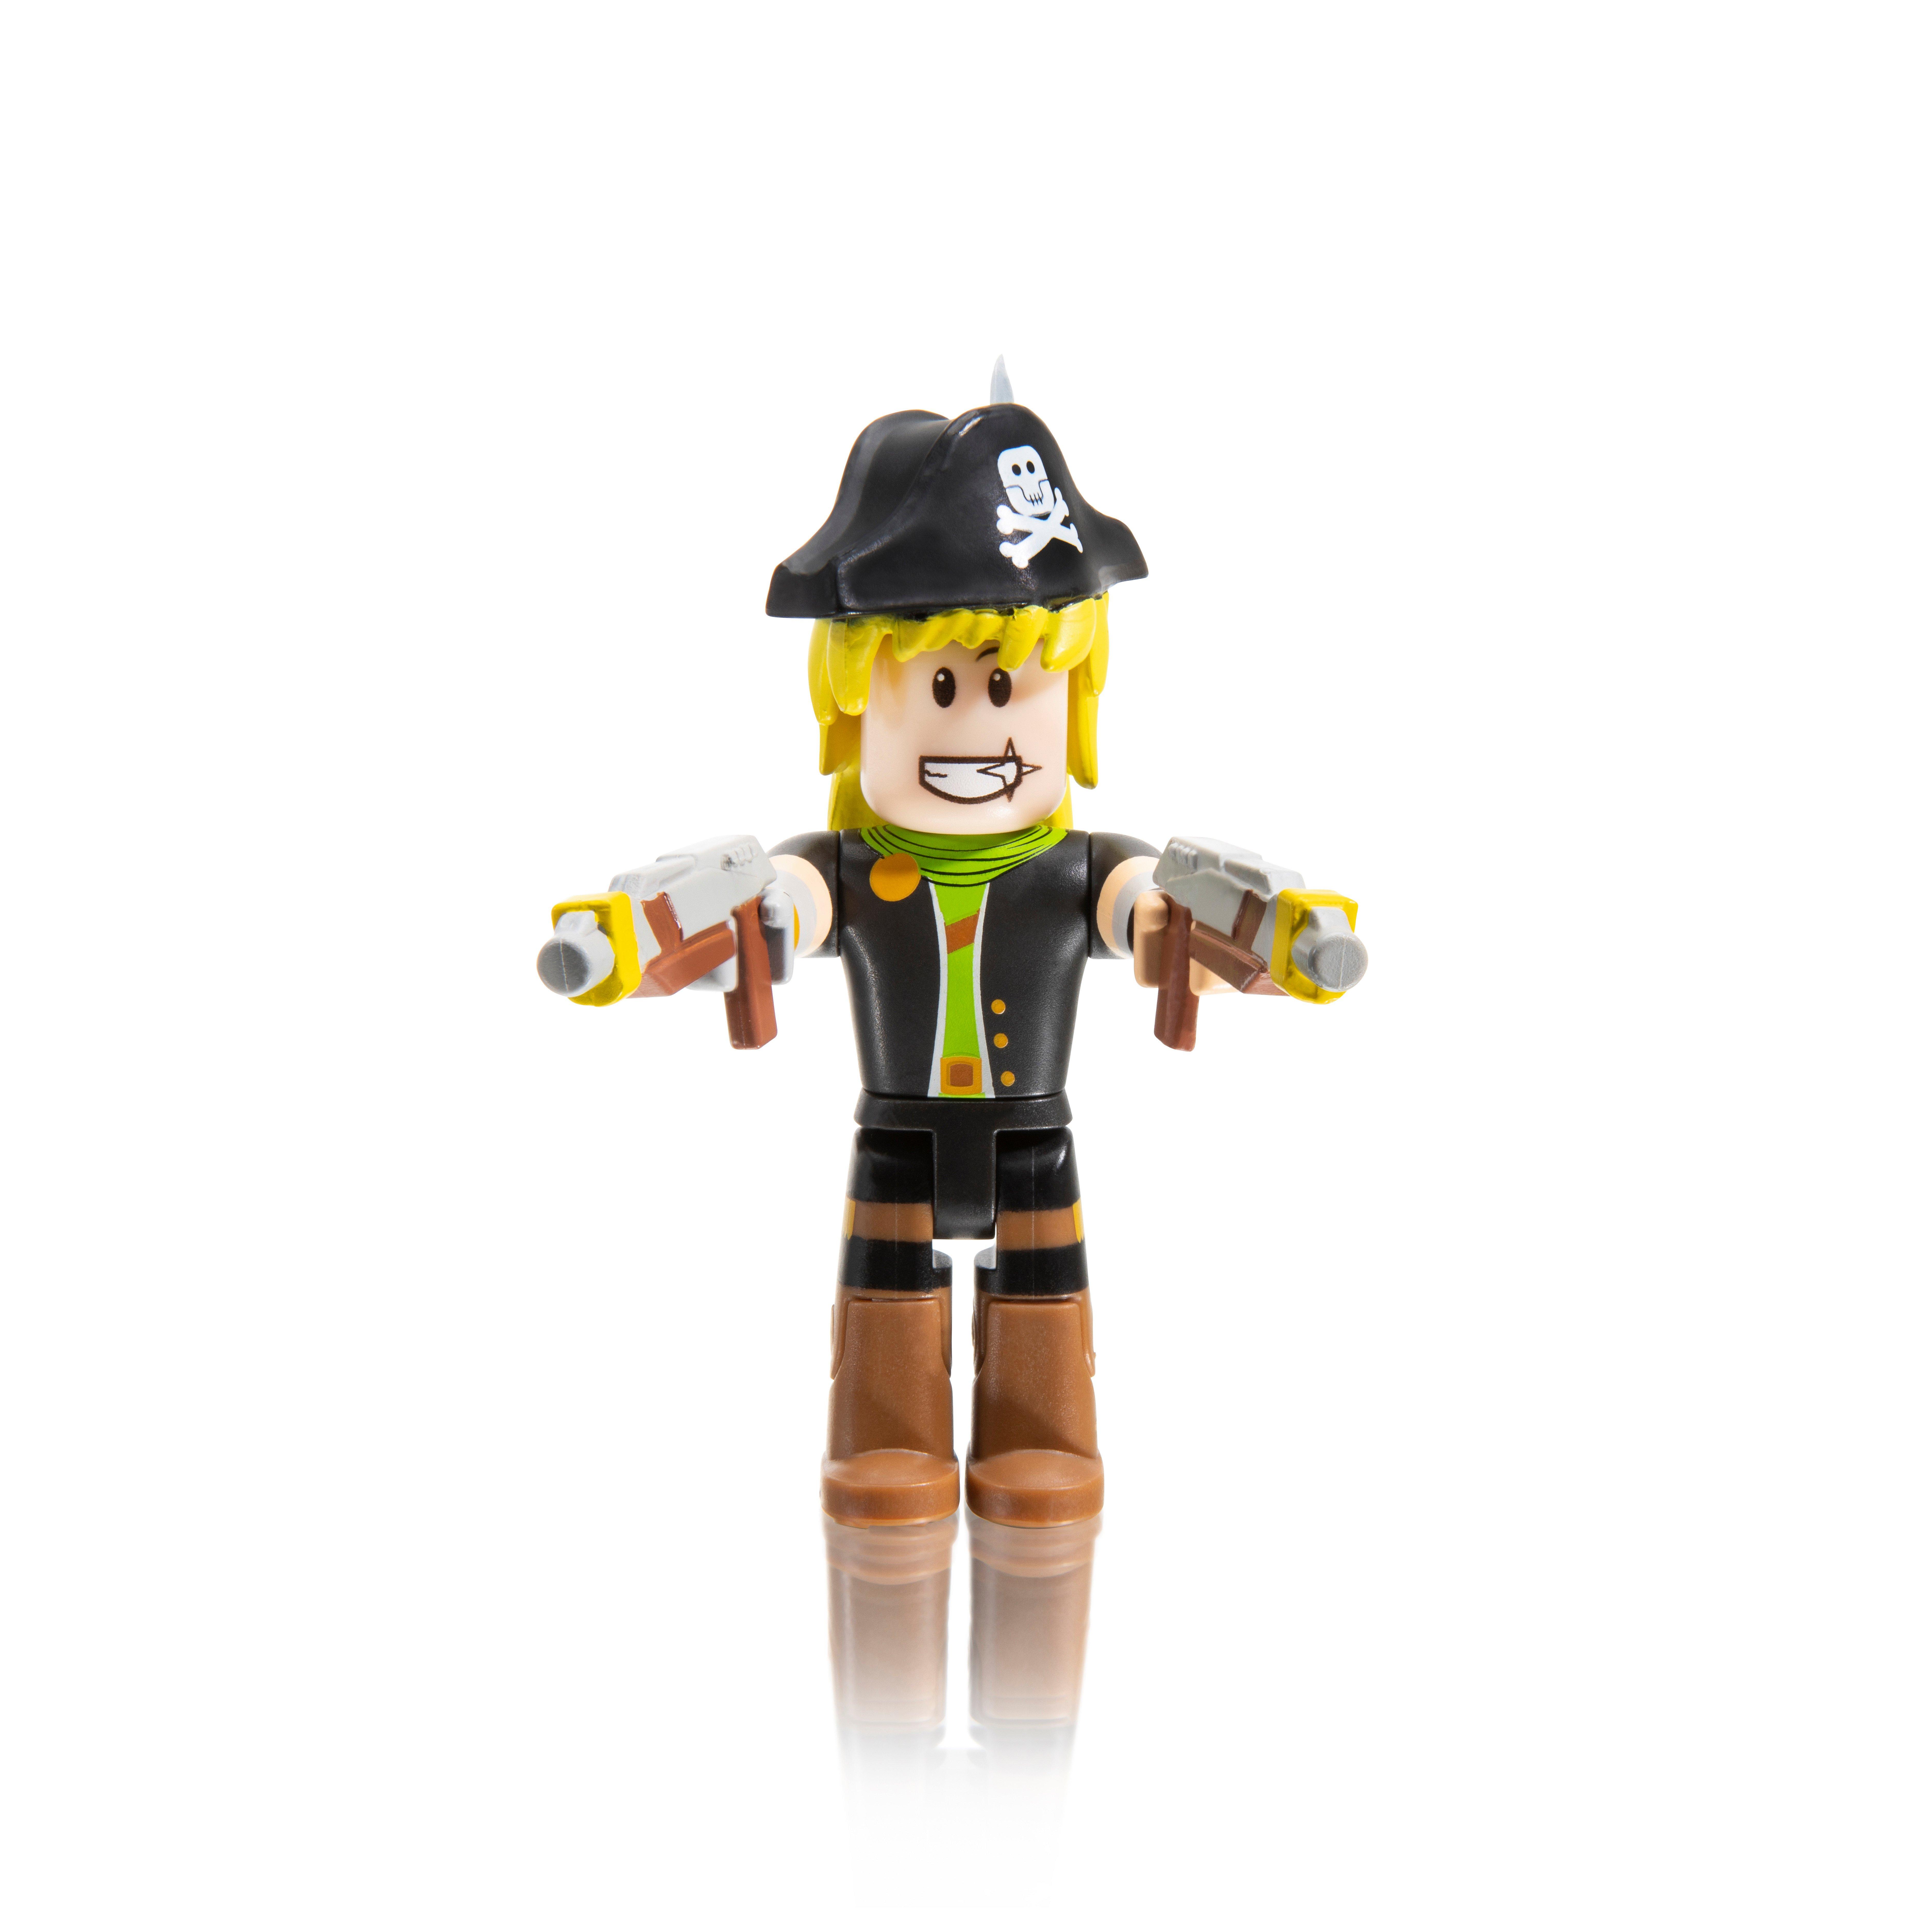 Roblox Action Collection Series 7 Mystery Figure Includes 1 Figure And Exclusive Virtual Item Gamestop - roblox series 7 all items